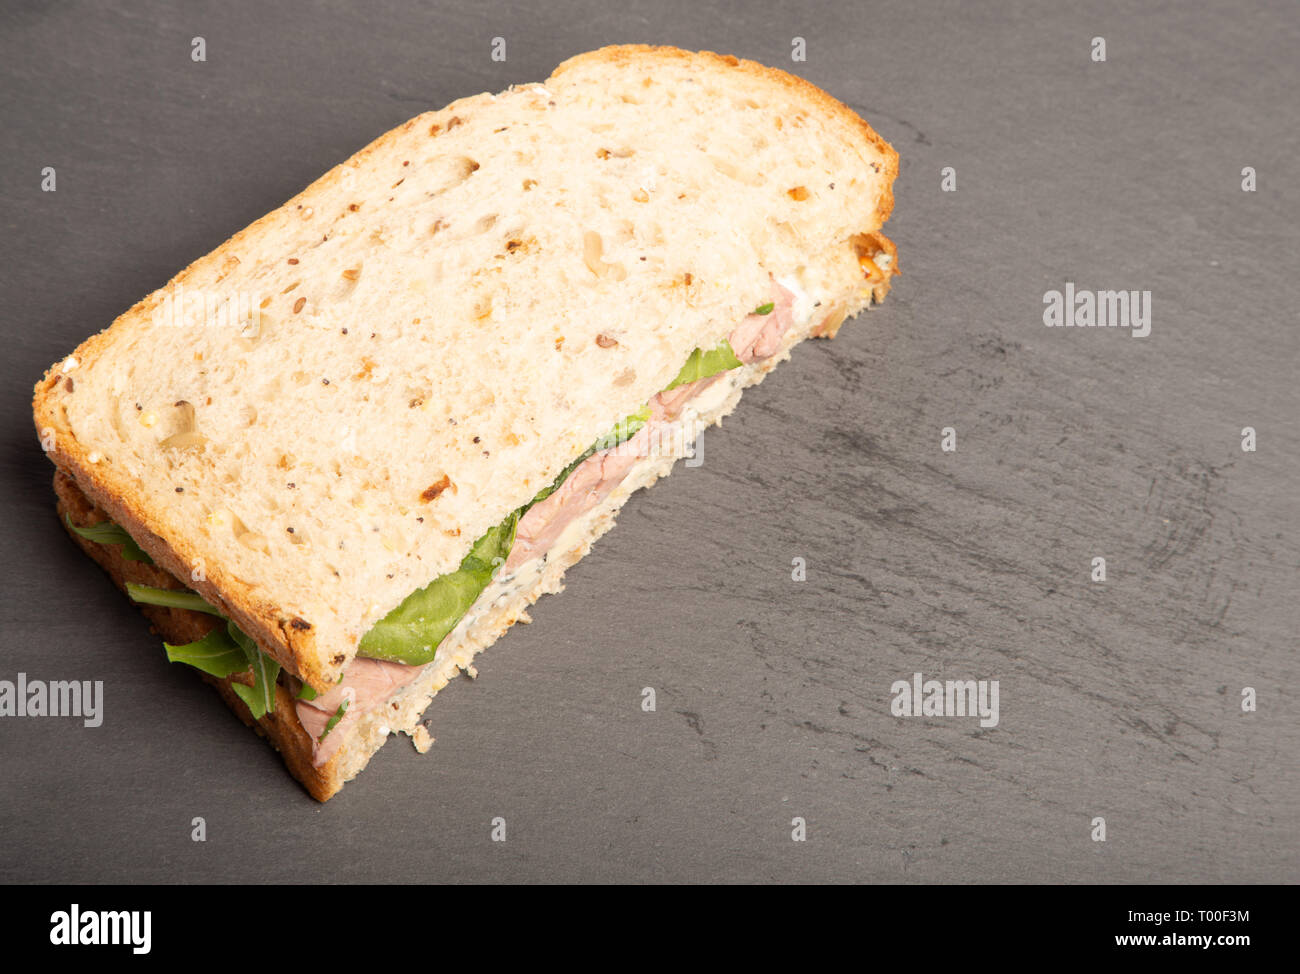 whole grain bread sandwich of steak, Stilton and spinach. delicious lunch time meal. organic with no single use wrapping, on a slate grey surface. Stock Photo